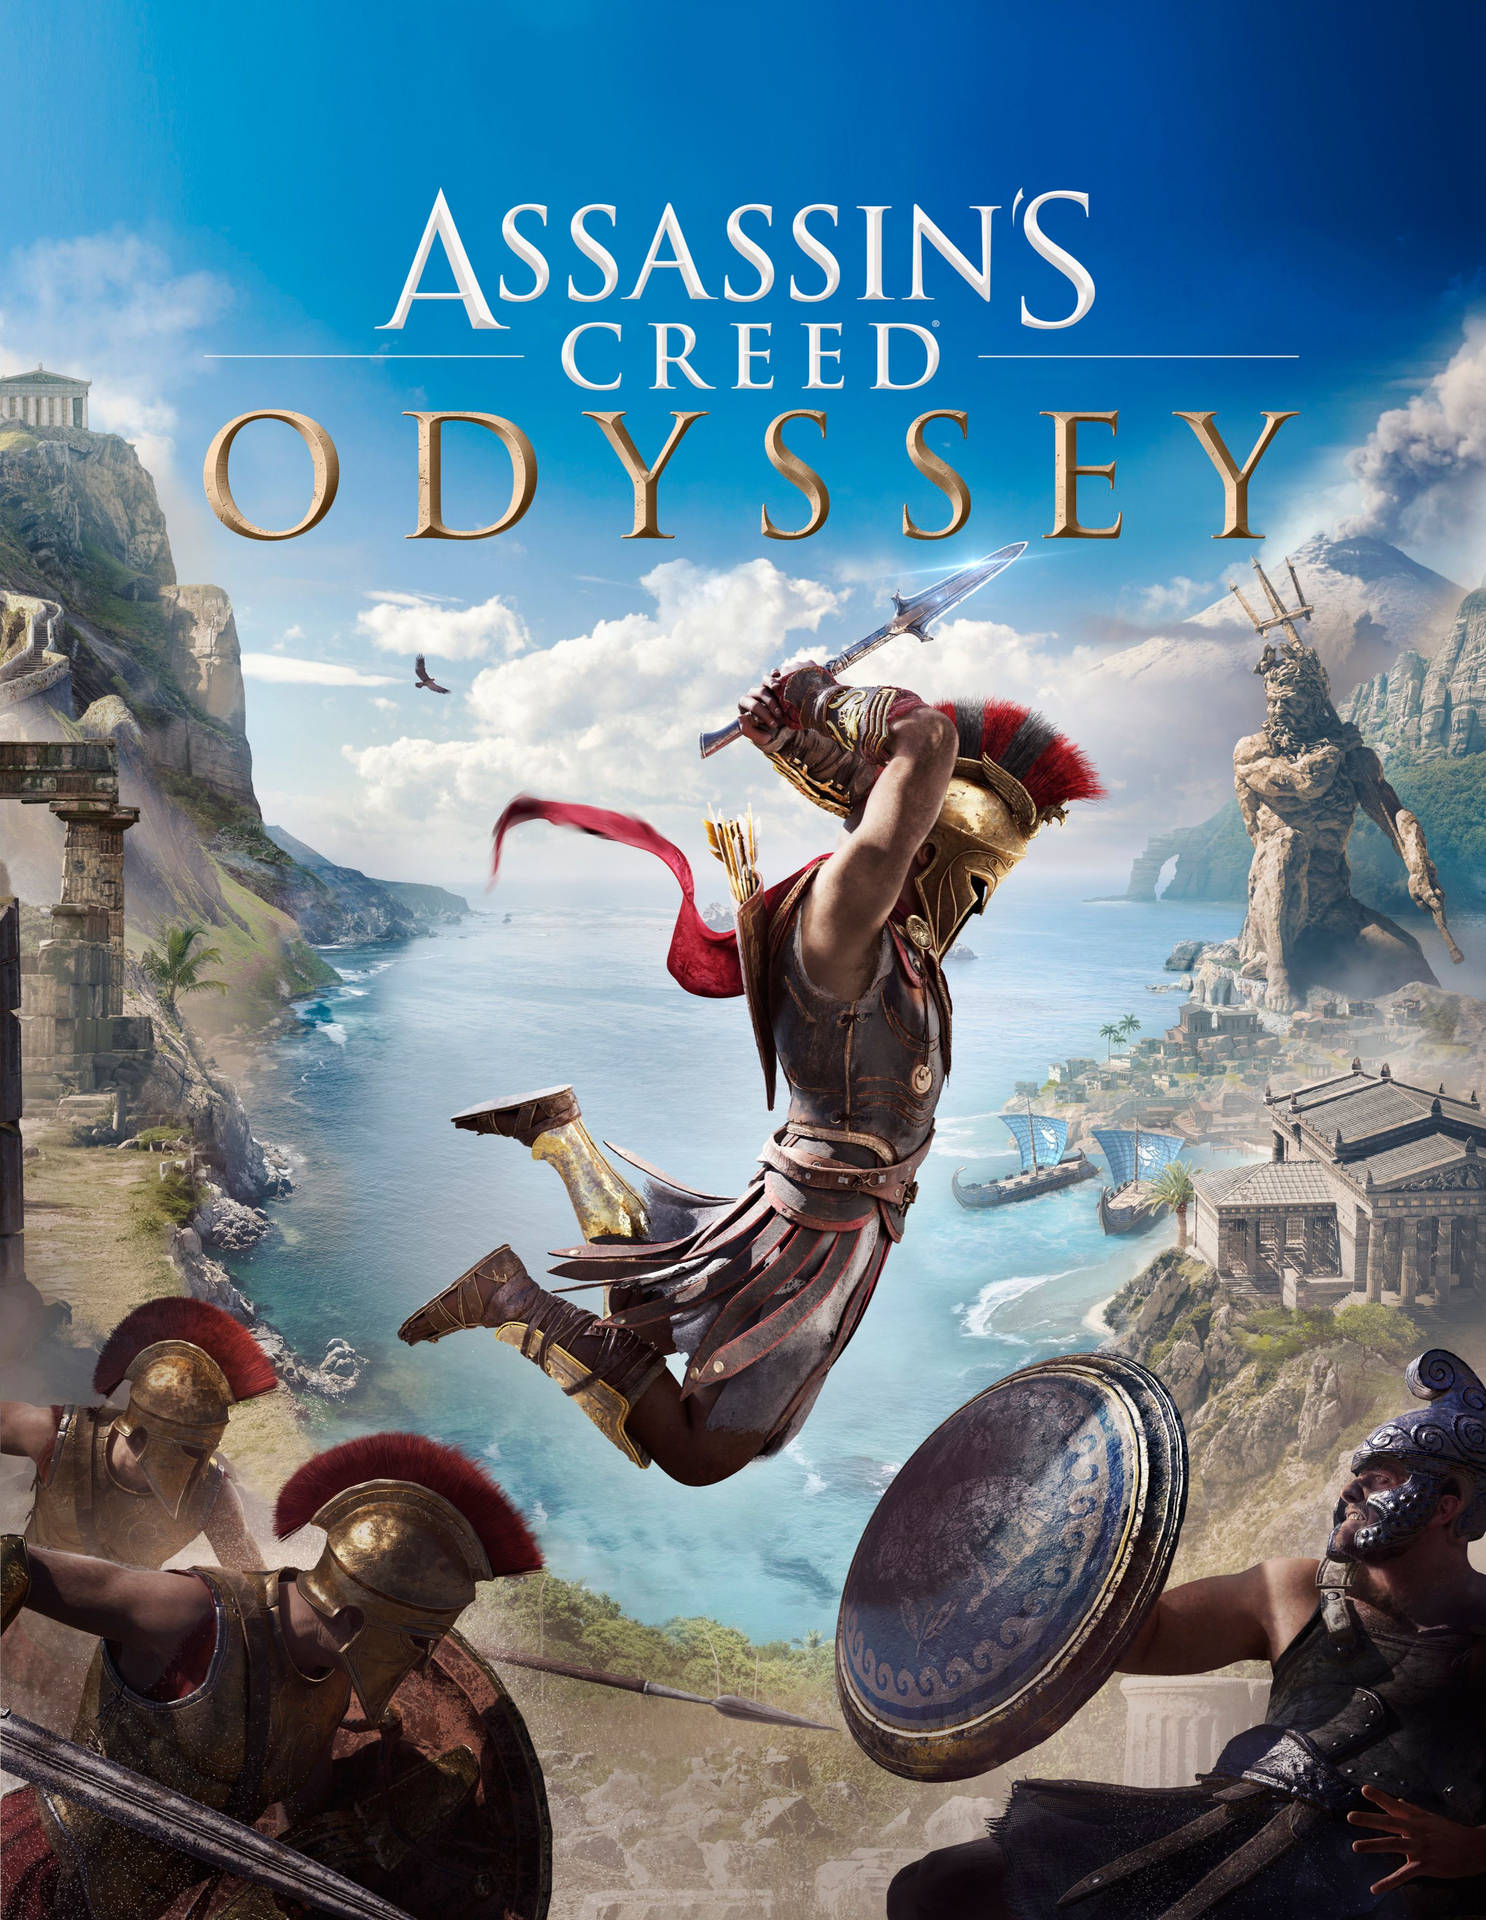 Assassin's Creed Odyssey Game Poster Background